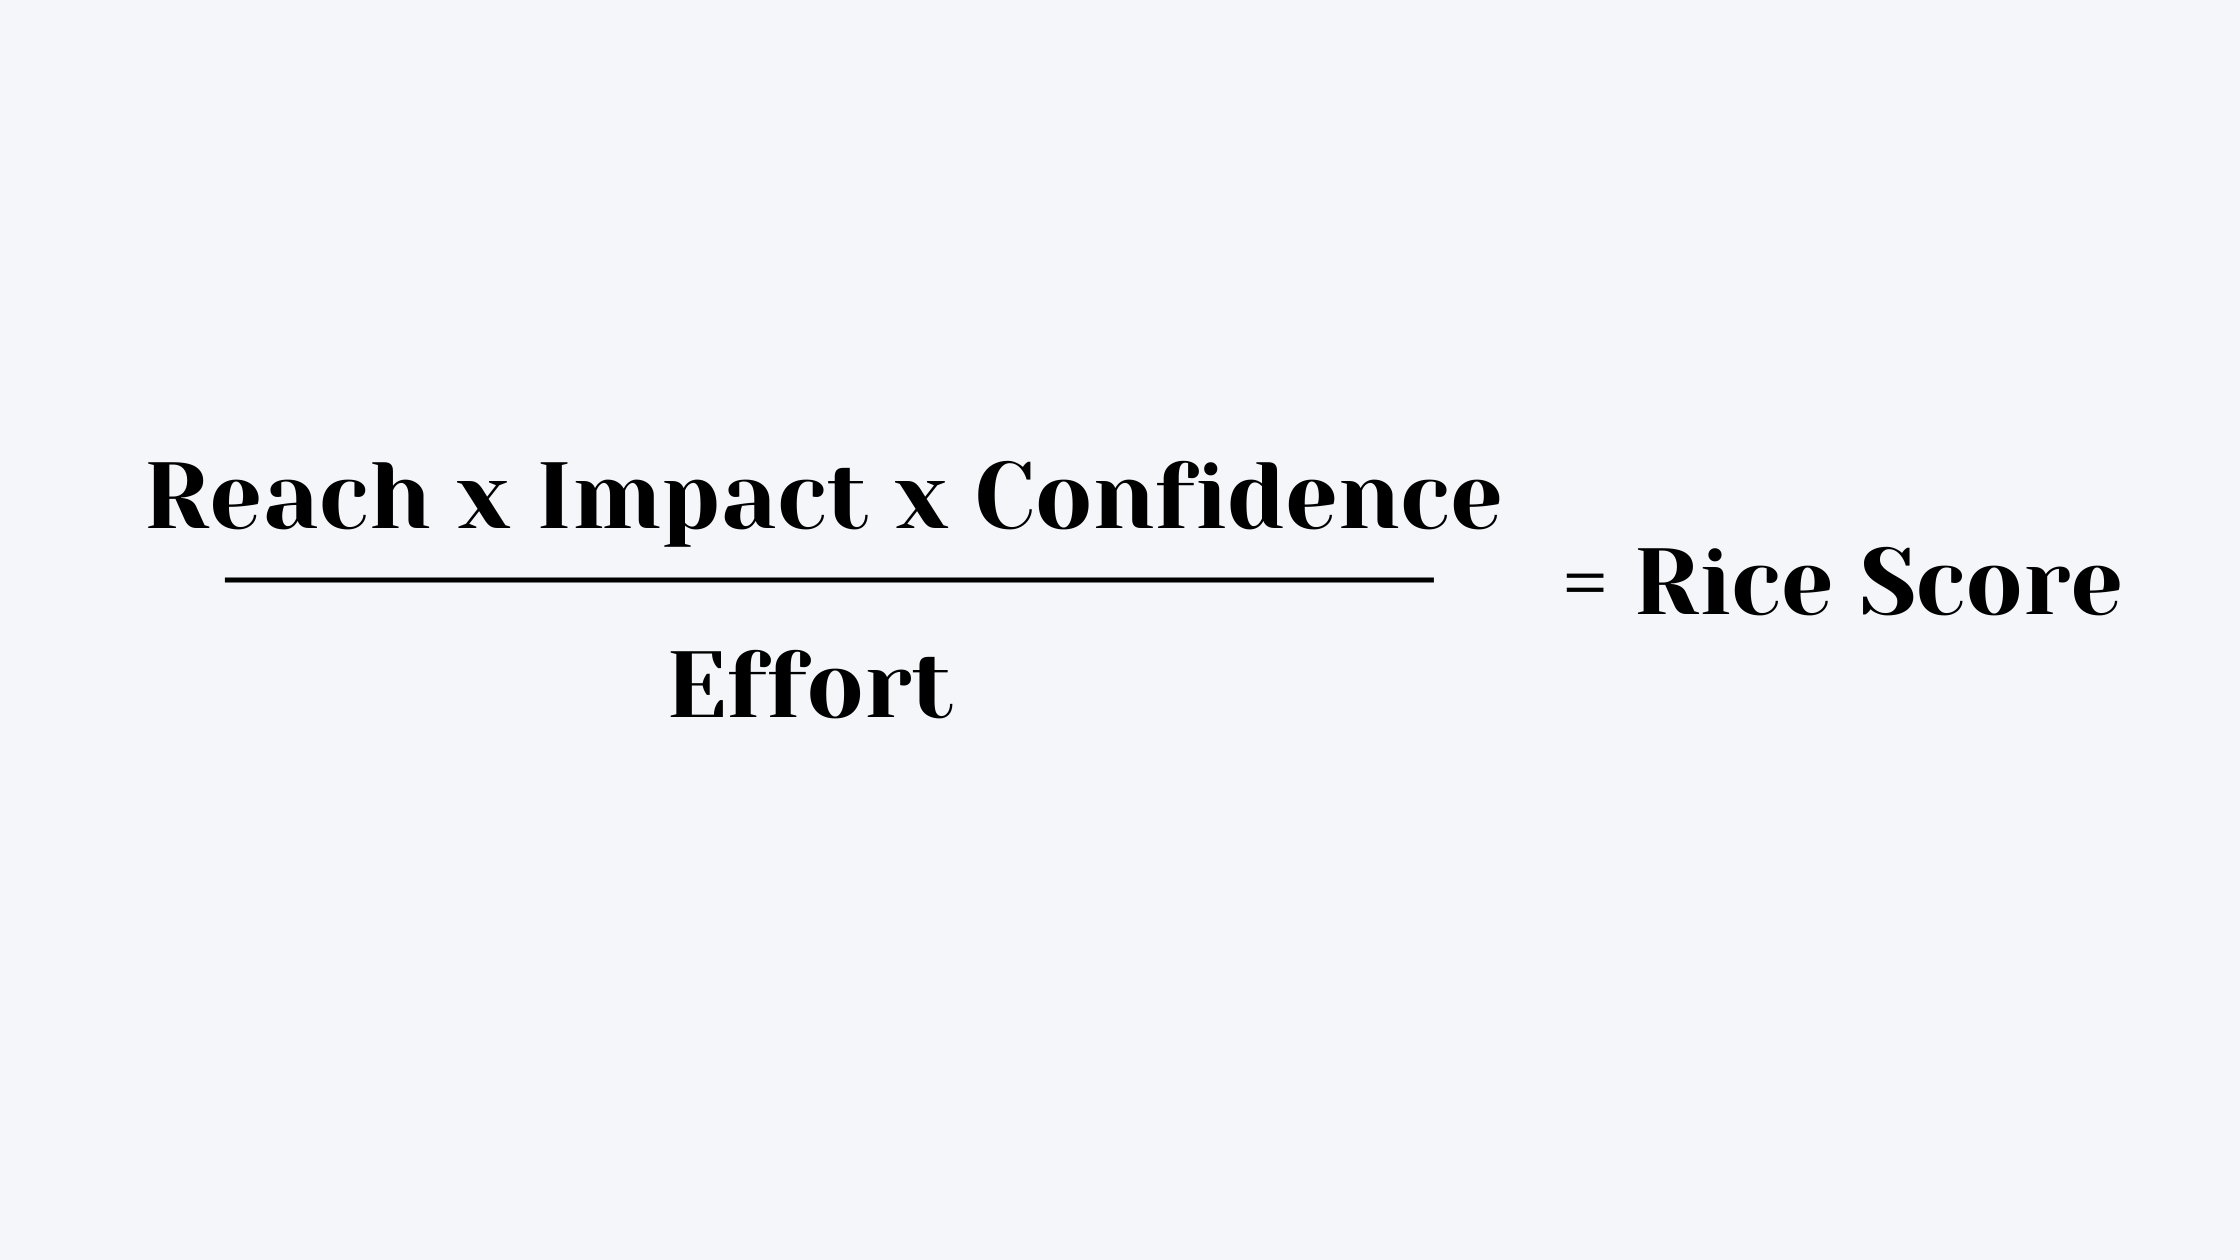 reach times impact times confidence divided by effort equals the RICE score